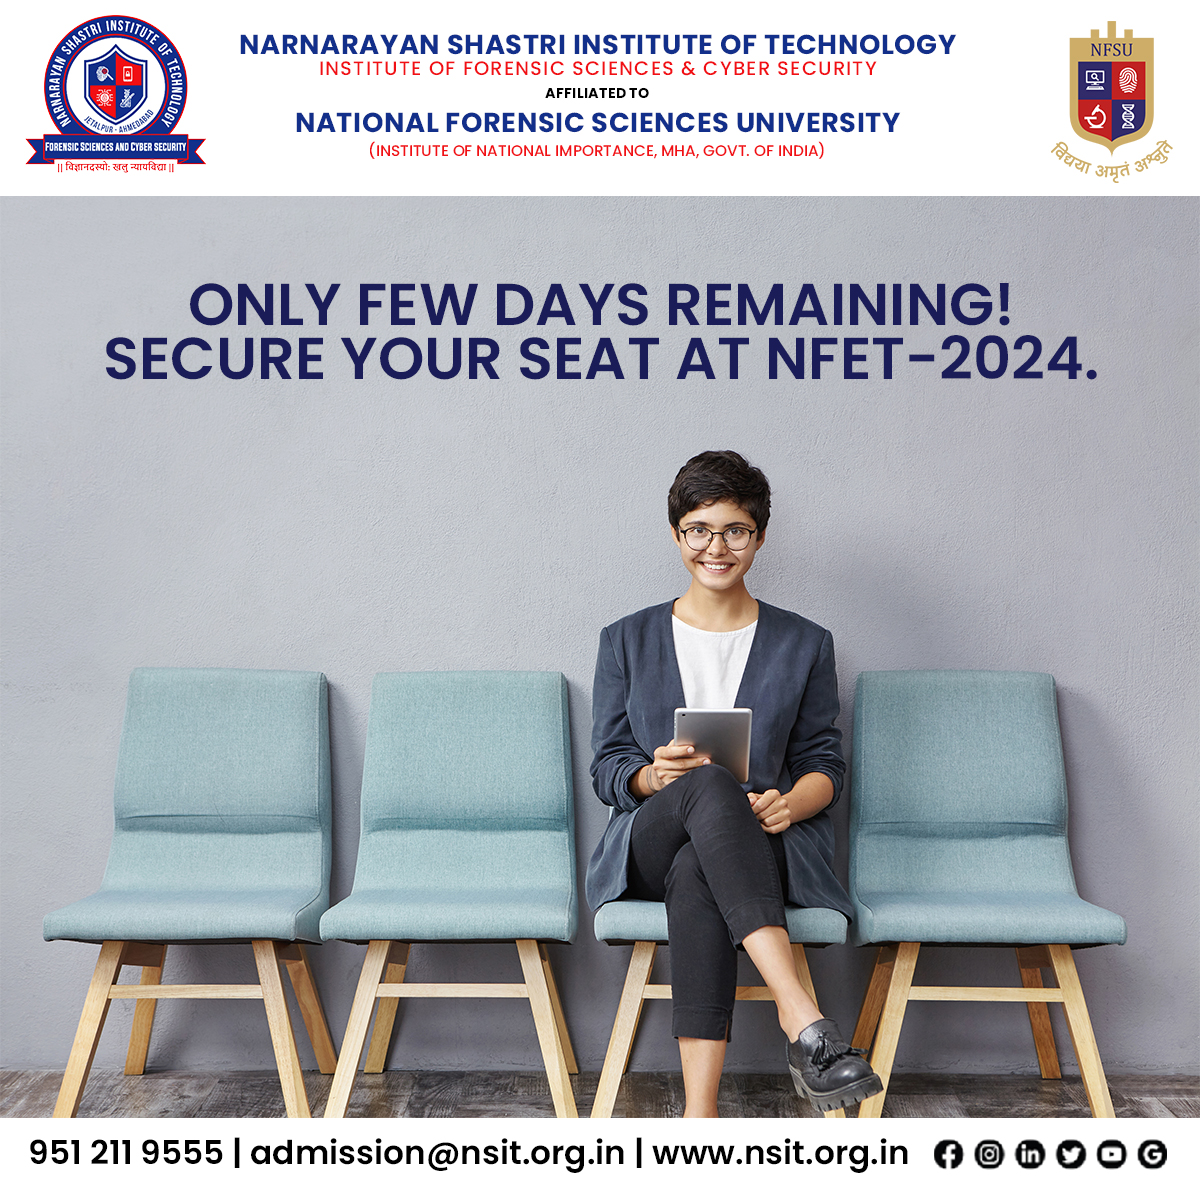 Only a few seats remain at NFET-2024.
Secure your seat today!

nsit.org.in

#nsit #nsitjetalpur #digitalforensics #cybersecurity #ForensicScience #forensics #ahmedabad #AdmissionOpen #ifscs #security #technology #cybercrime #privacy #college #student #education